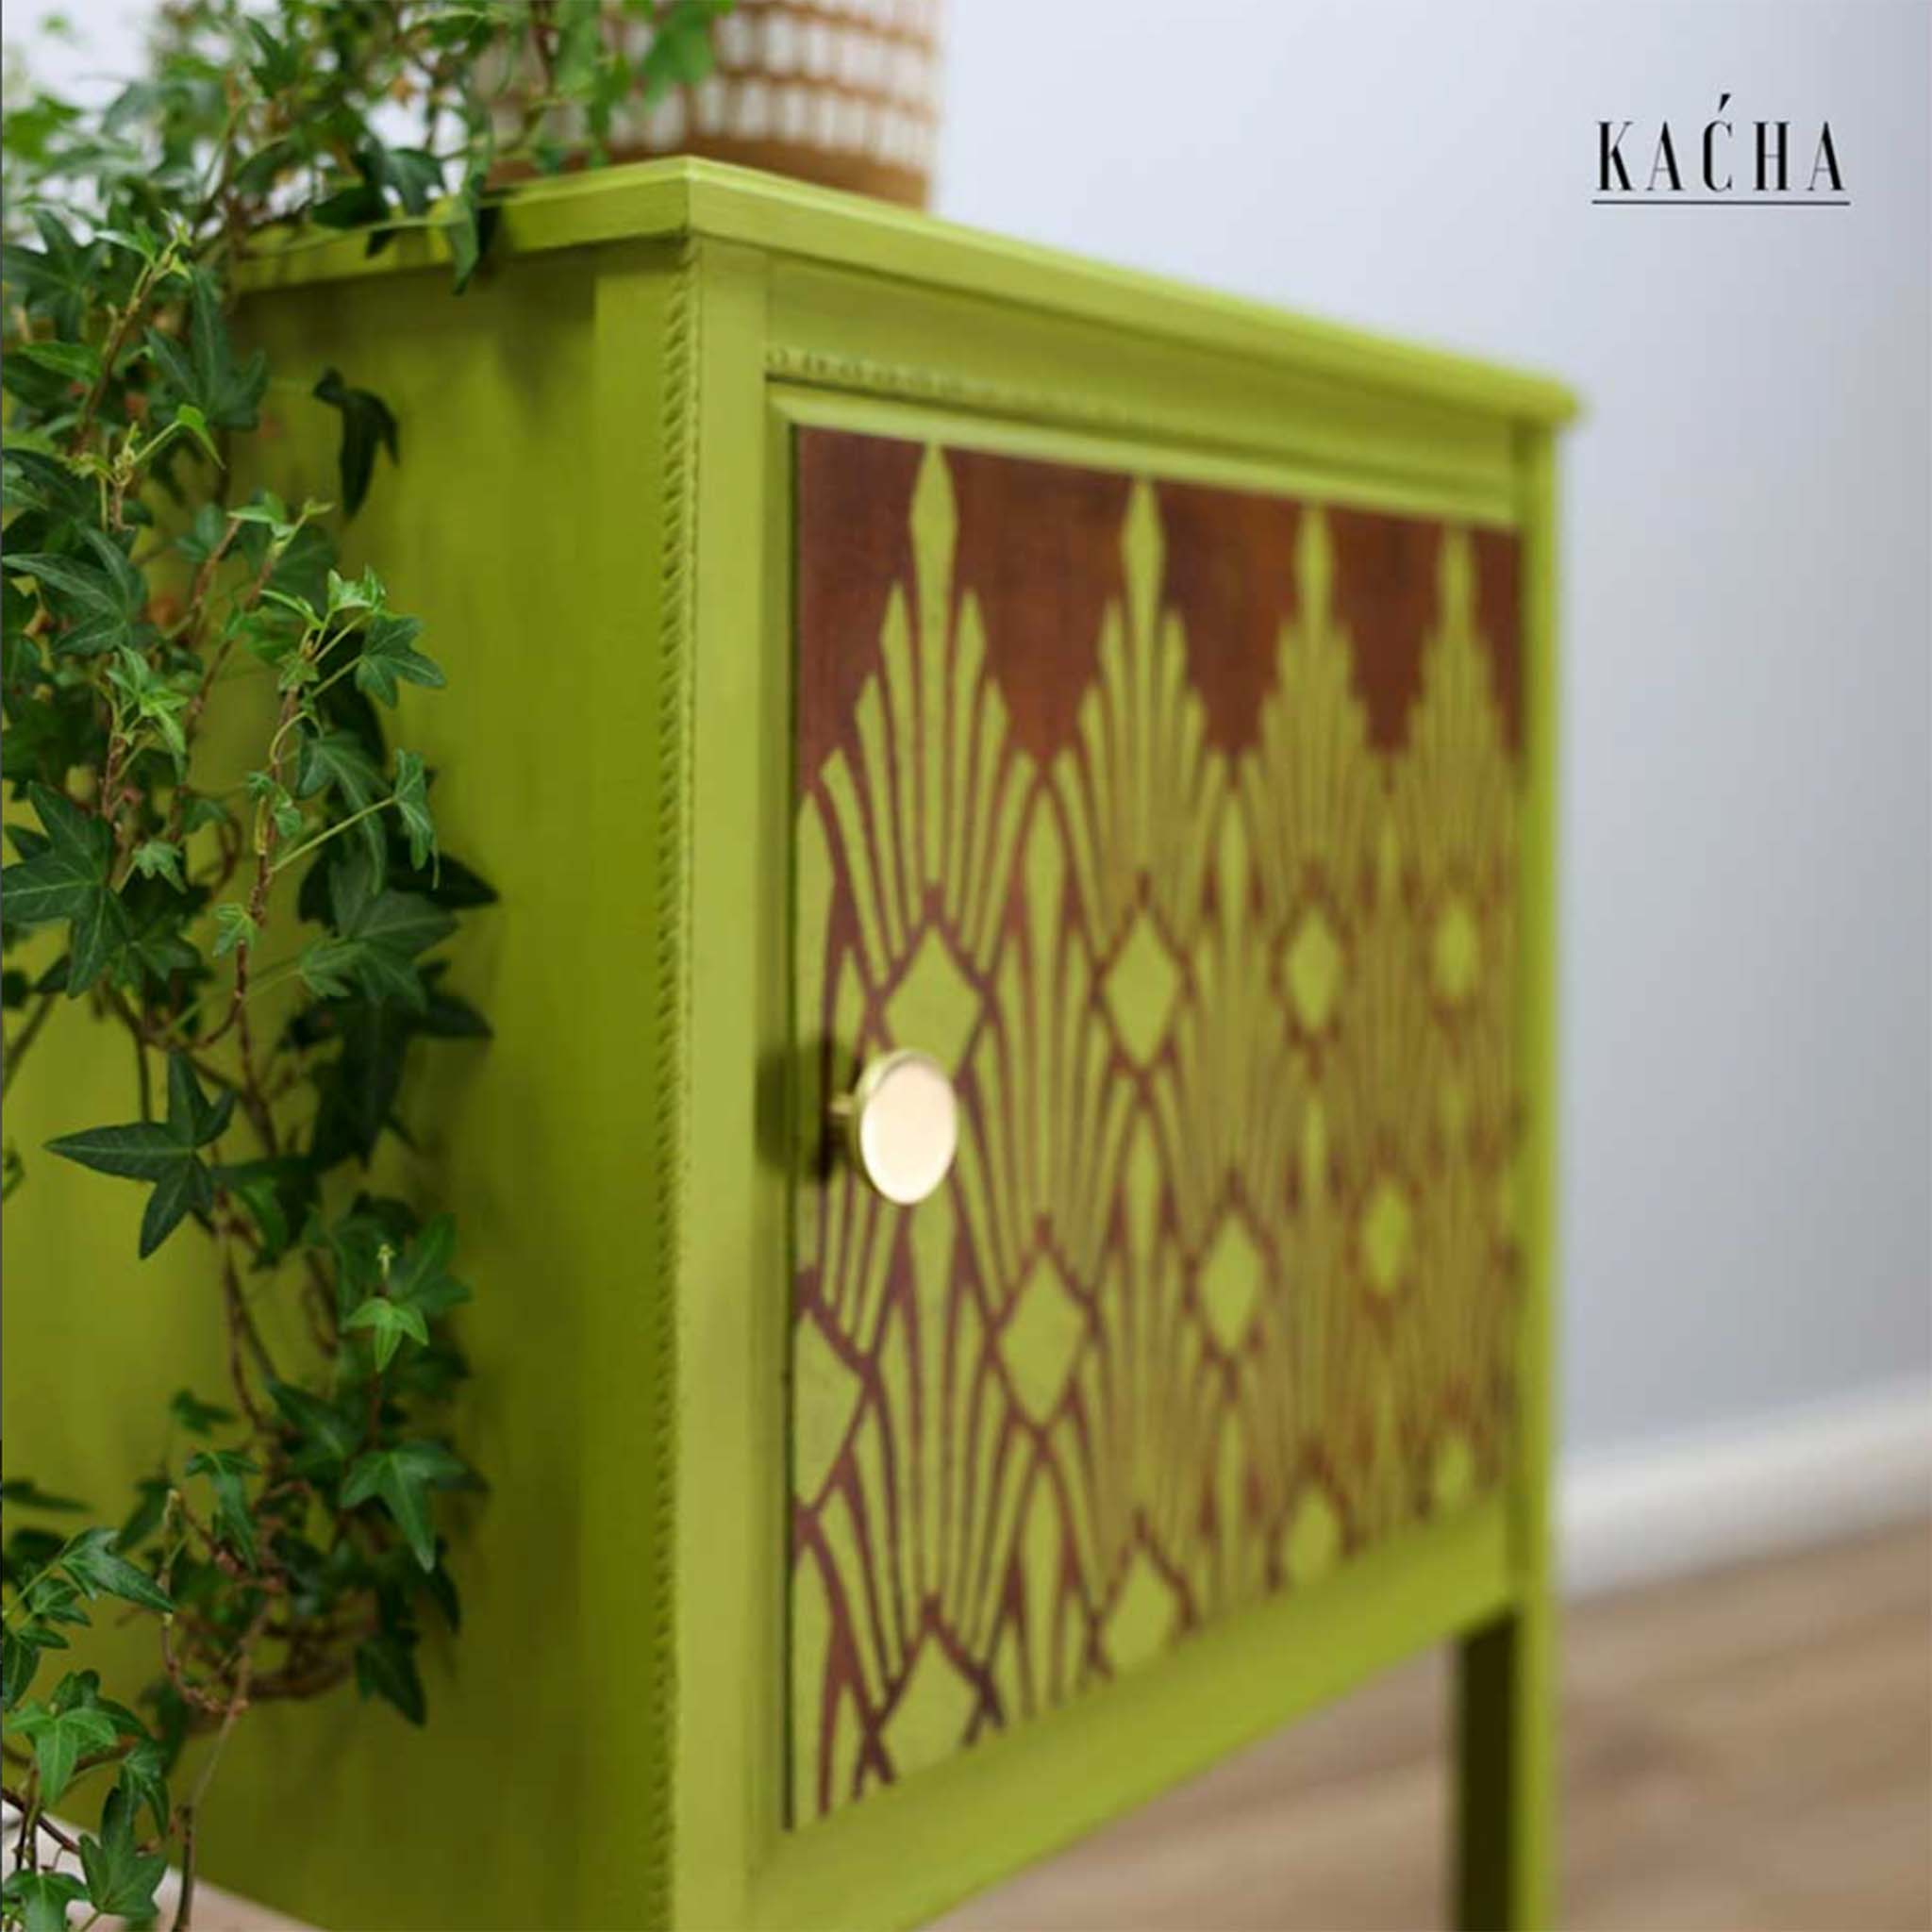 A close-up view of a small 1-door nightstand refurbished by Kacha is painted avocado green. The door is stained a dark wood color and features ReDesign with Prima's Sunlit Diamonds stencil in avocado green.